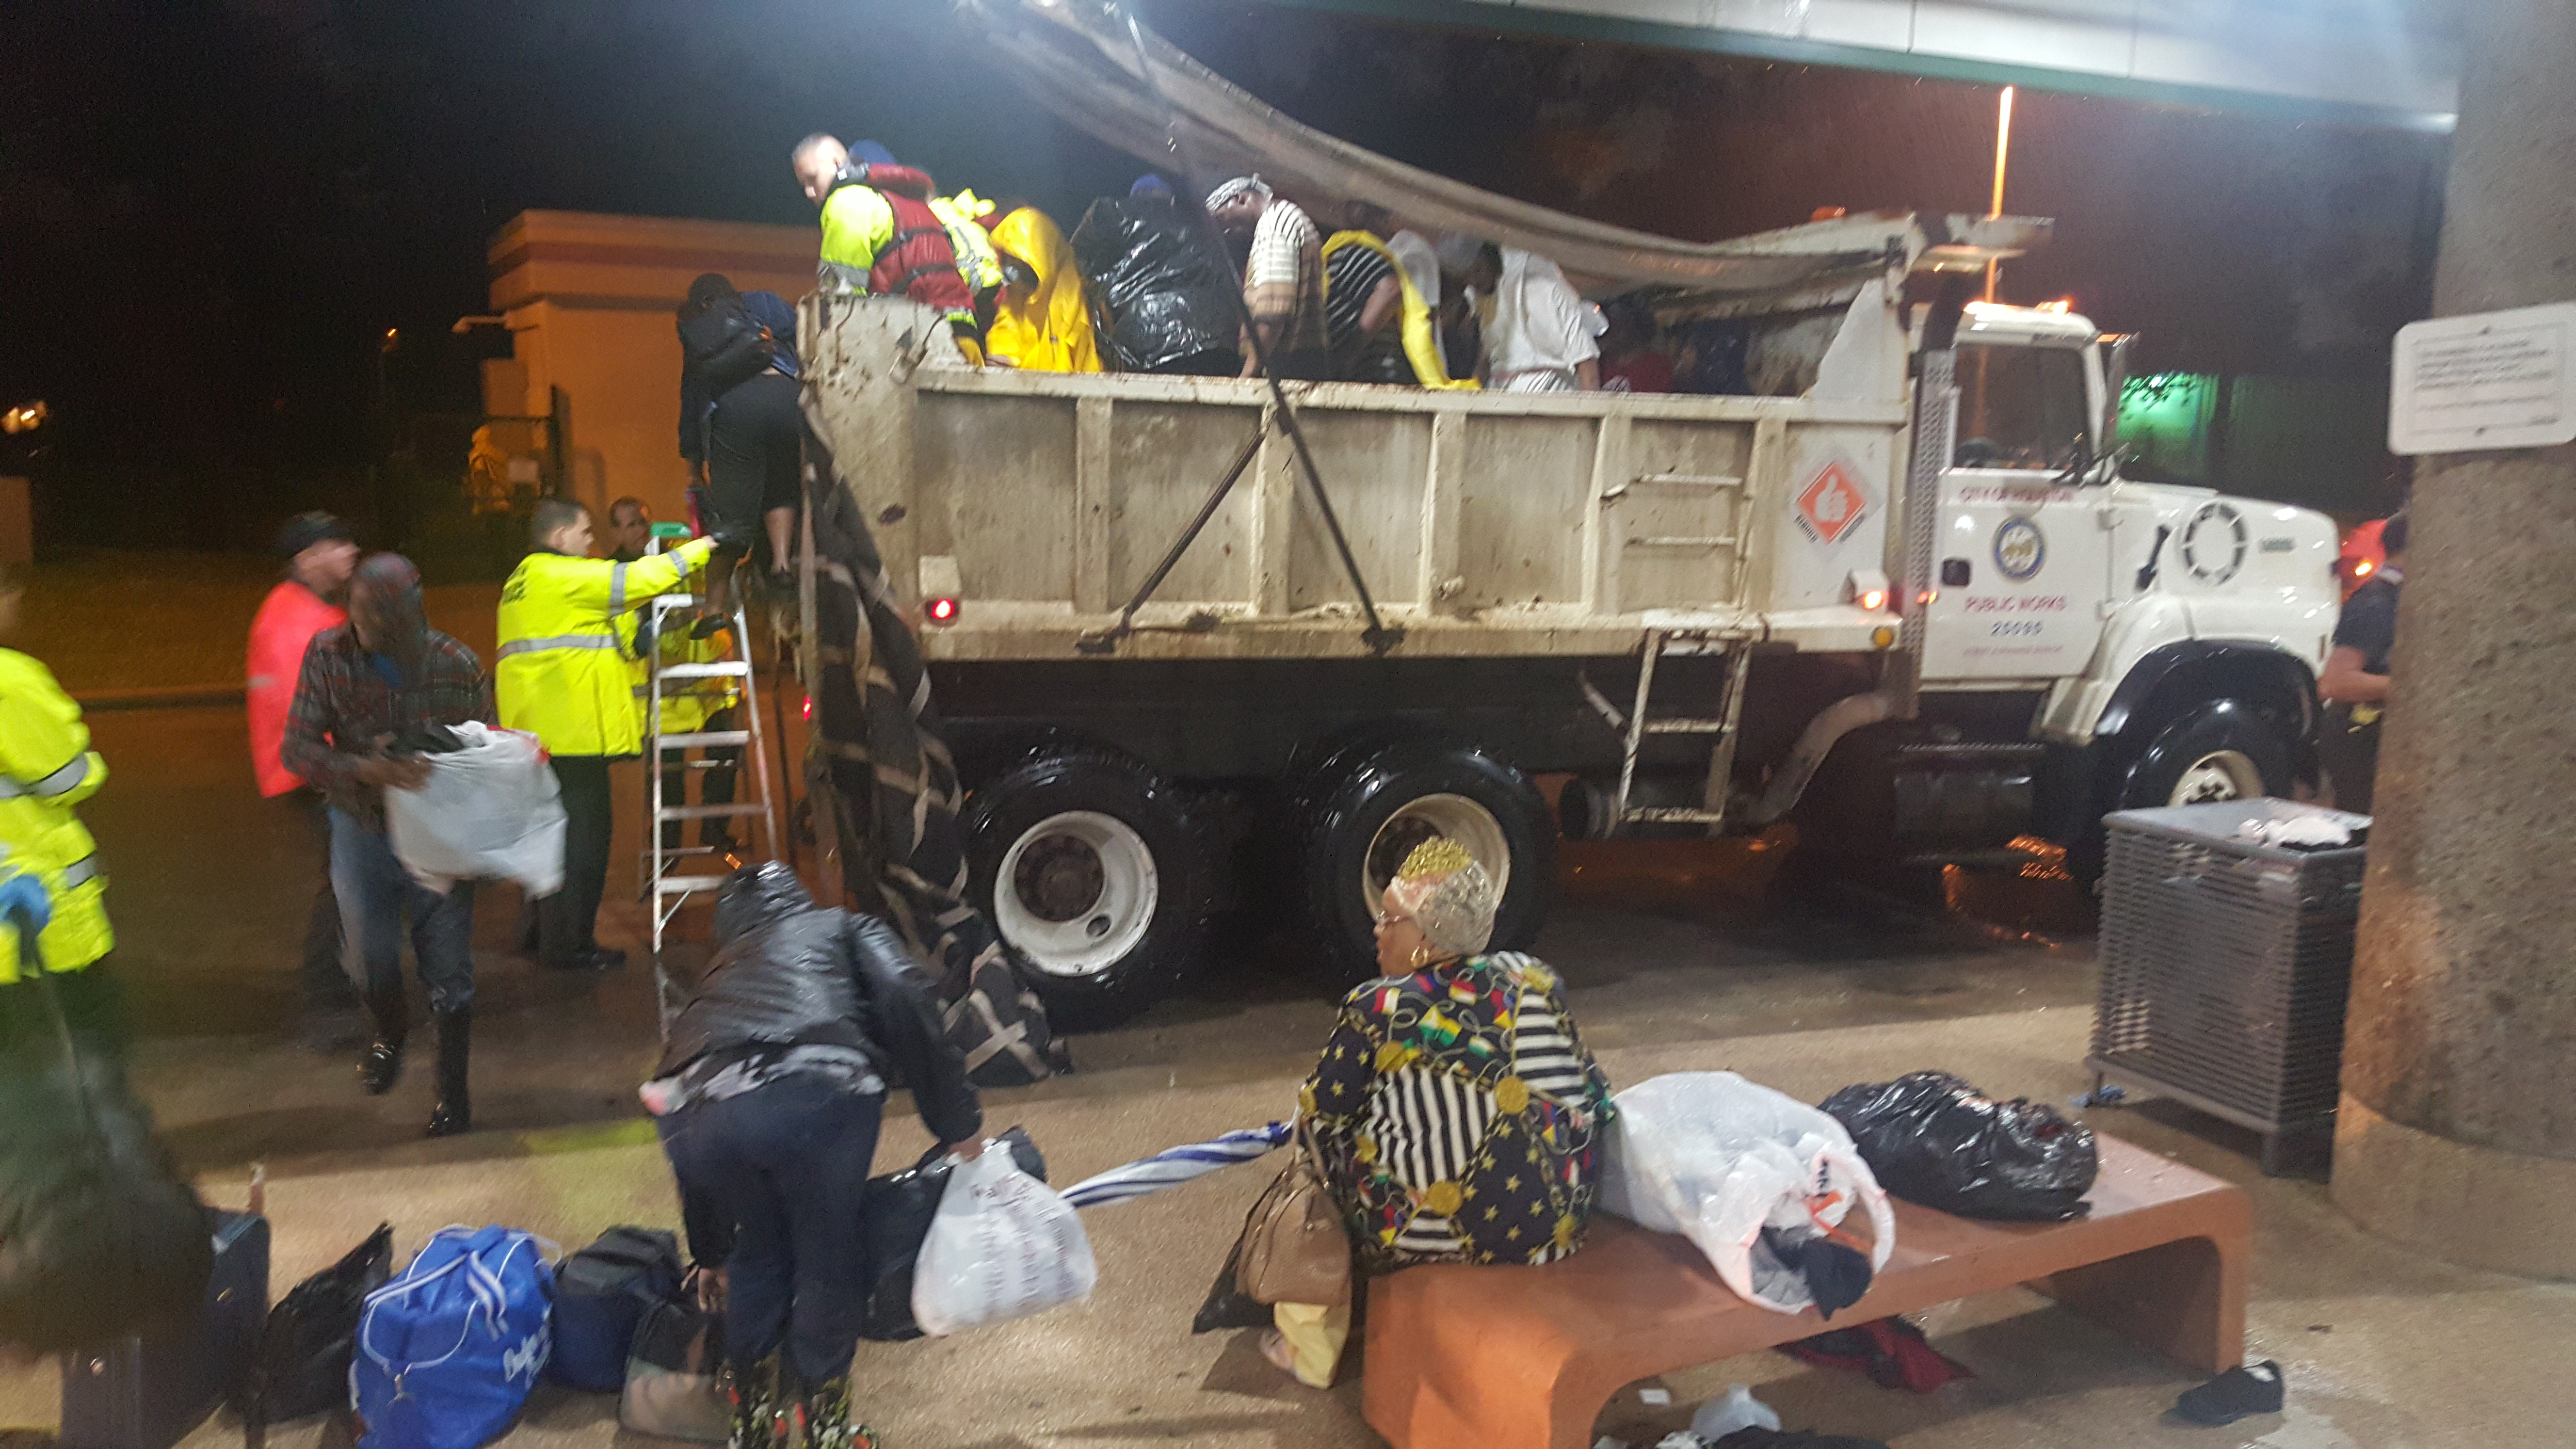 A dump truck pulls into Houston's Kashmere Transit Center with people rescued from Hurricane Harvey around midnight Monday